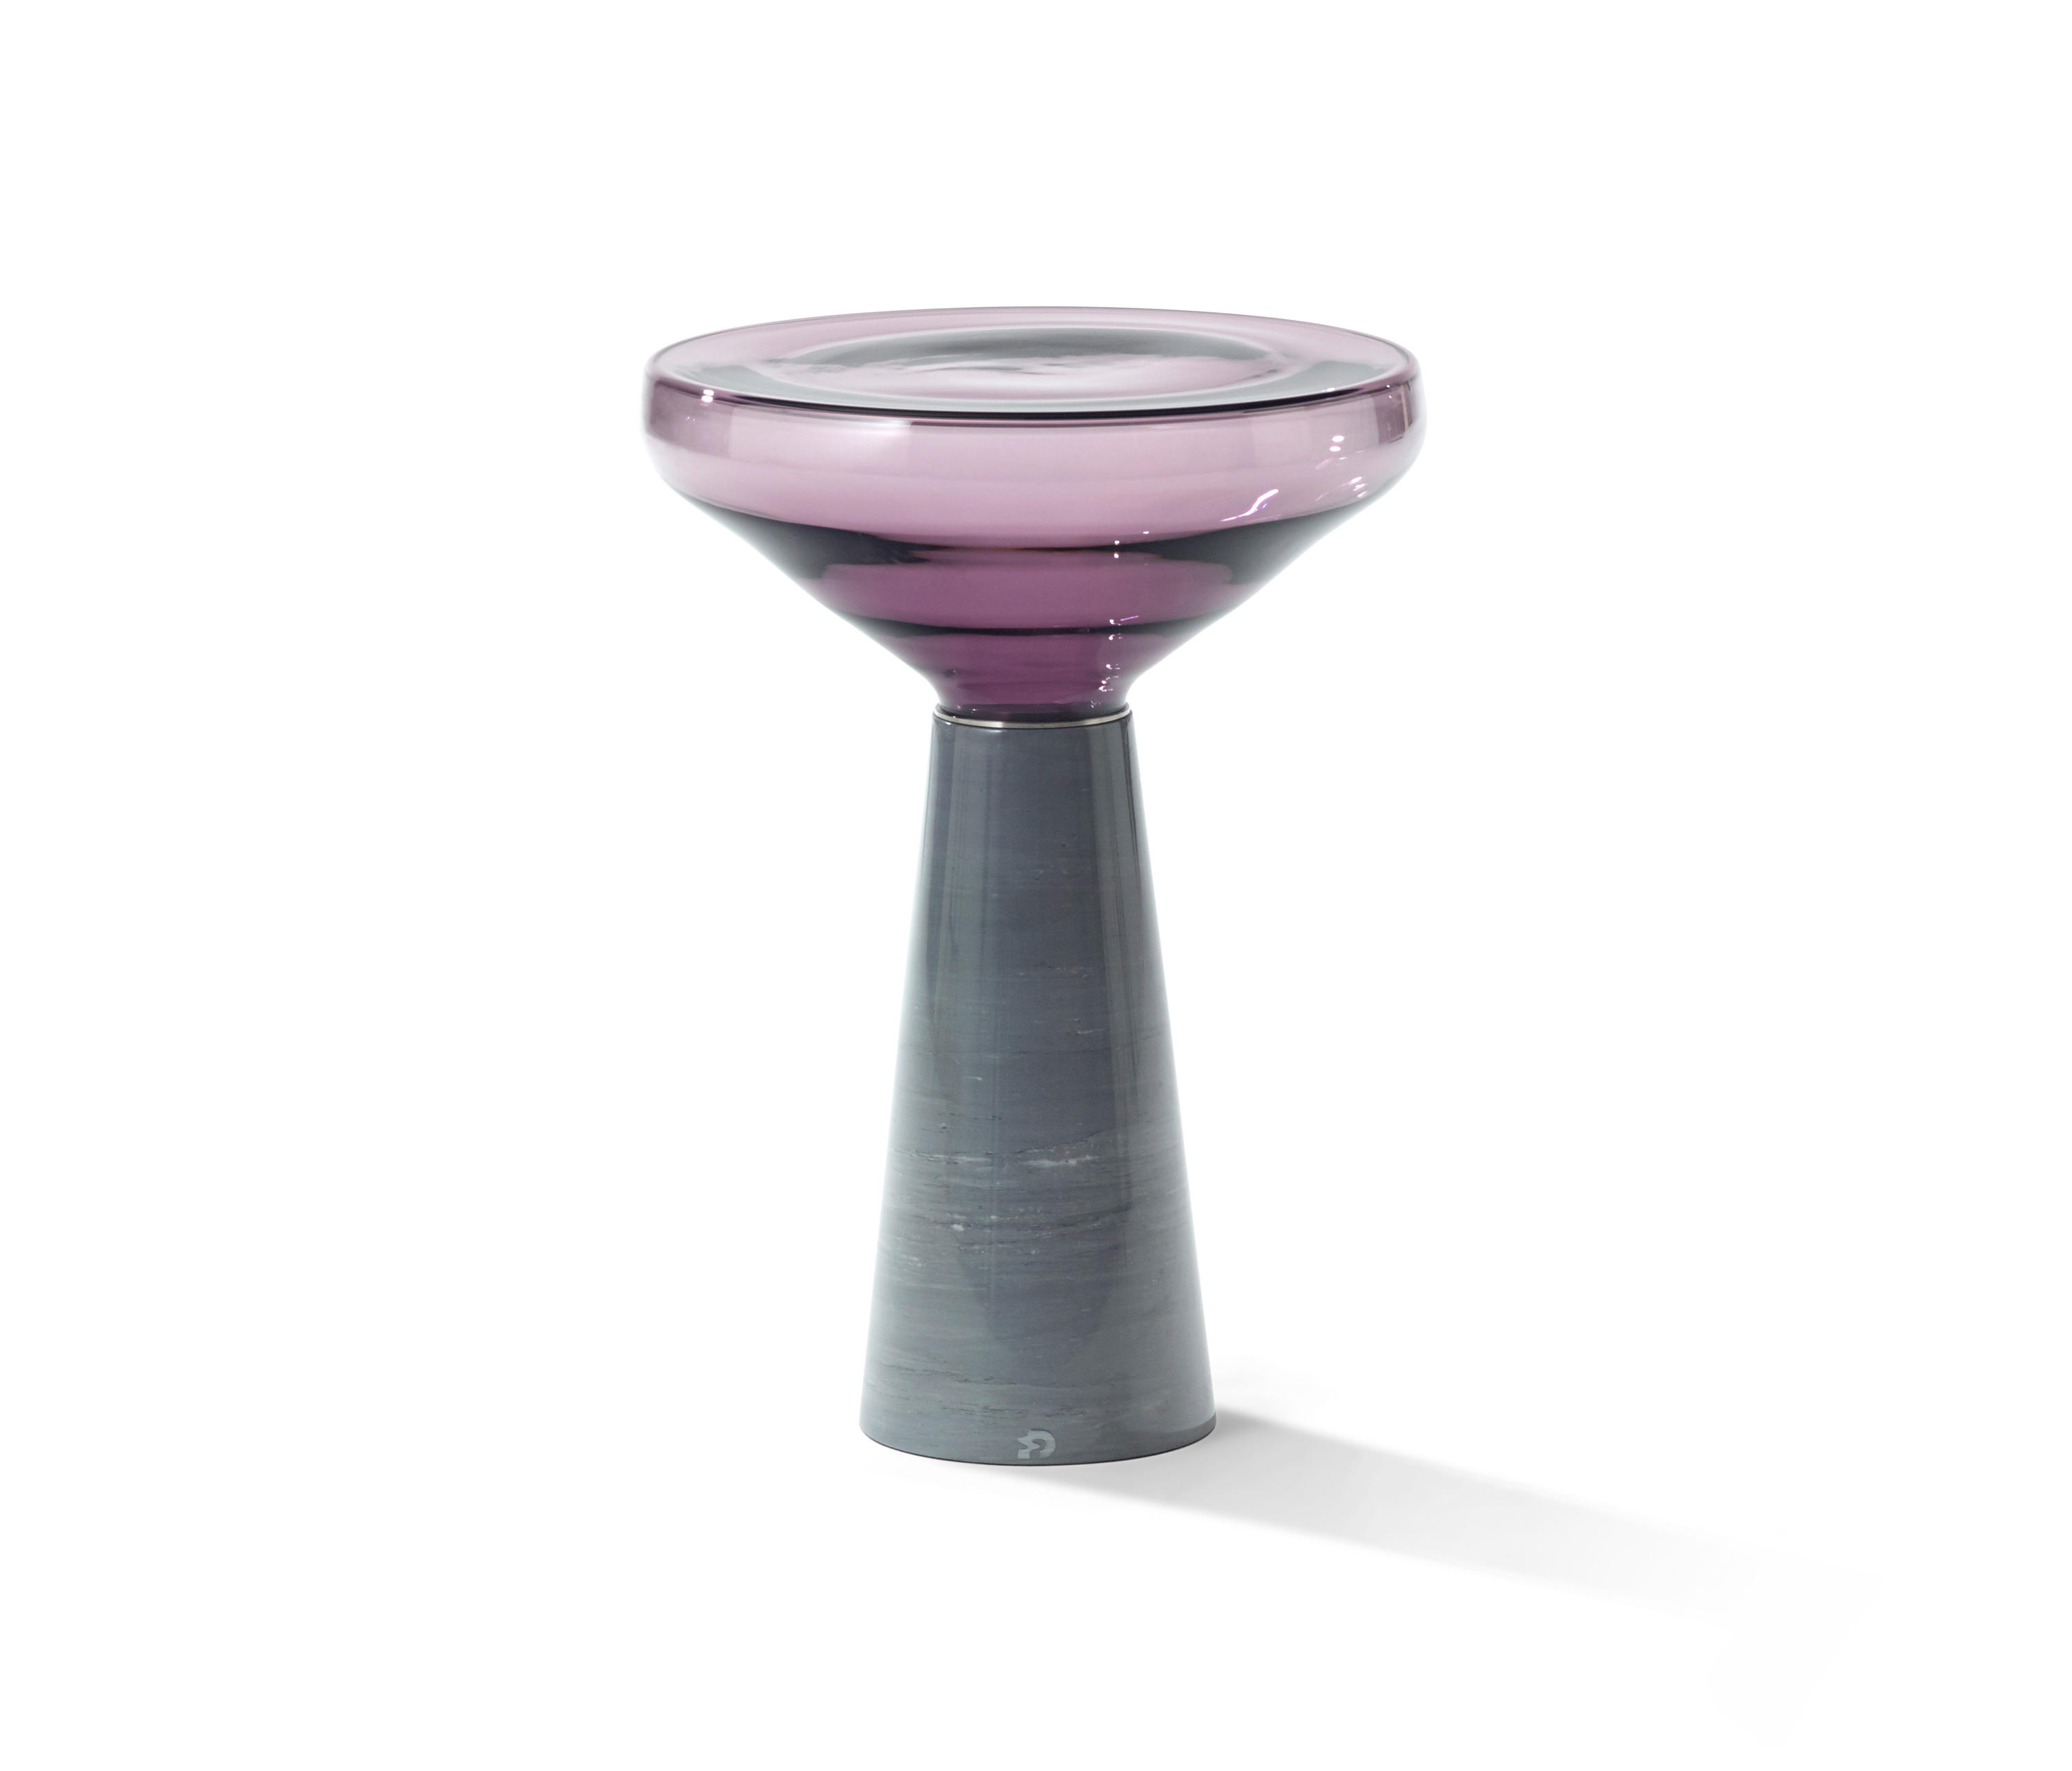 Blow Side Table by Stephan Veit for Draenert